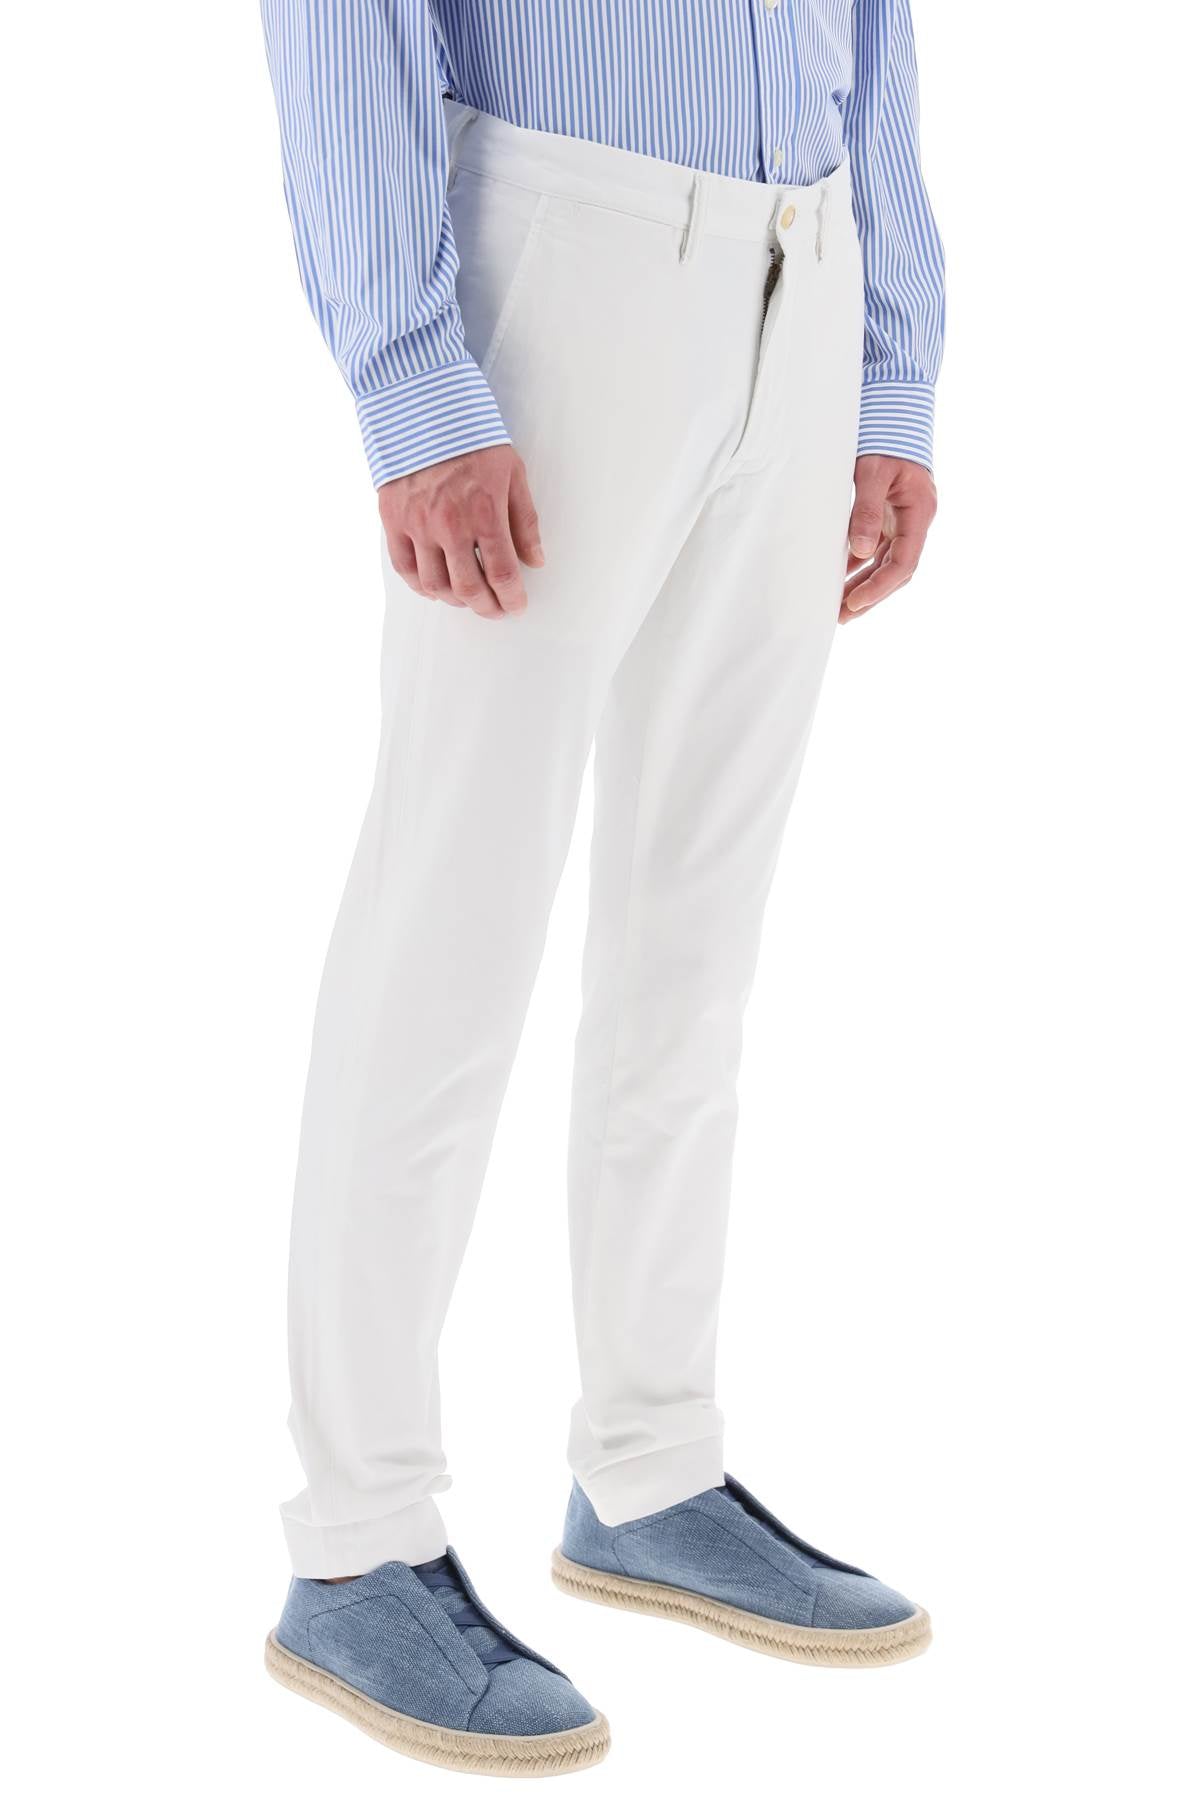 Polo ralph lauren chino pants in cotton-1